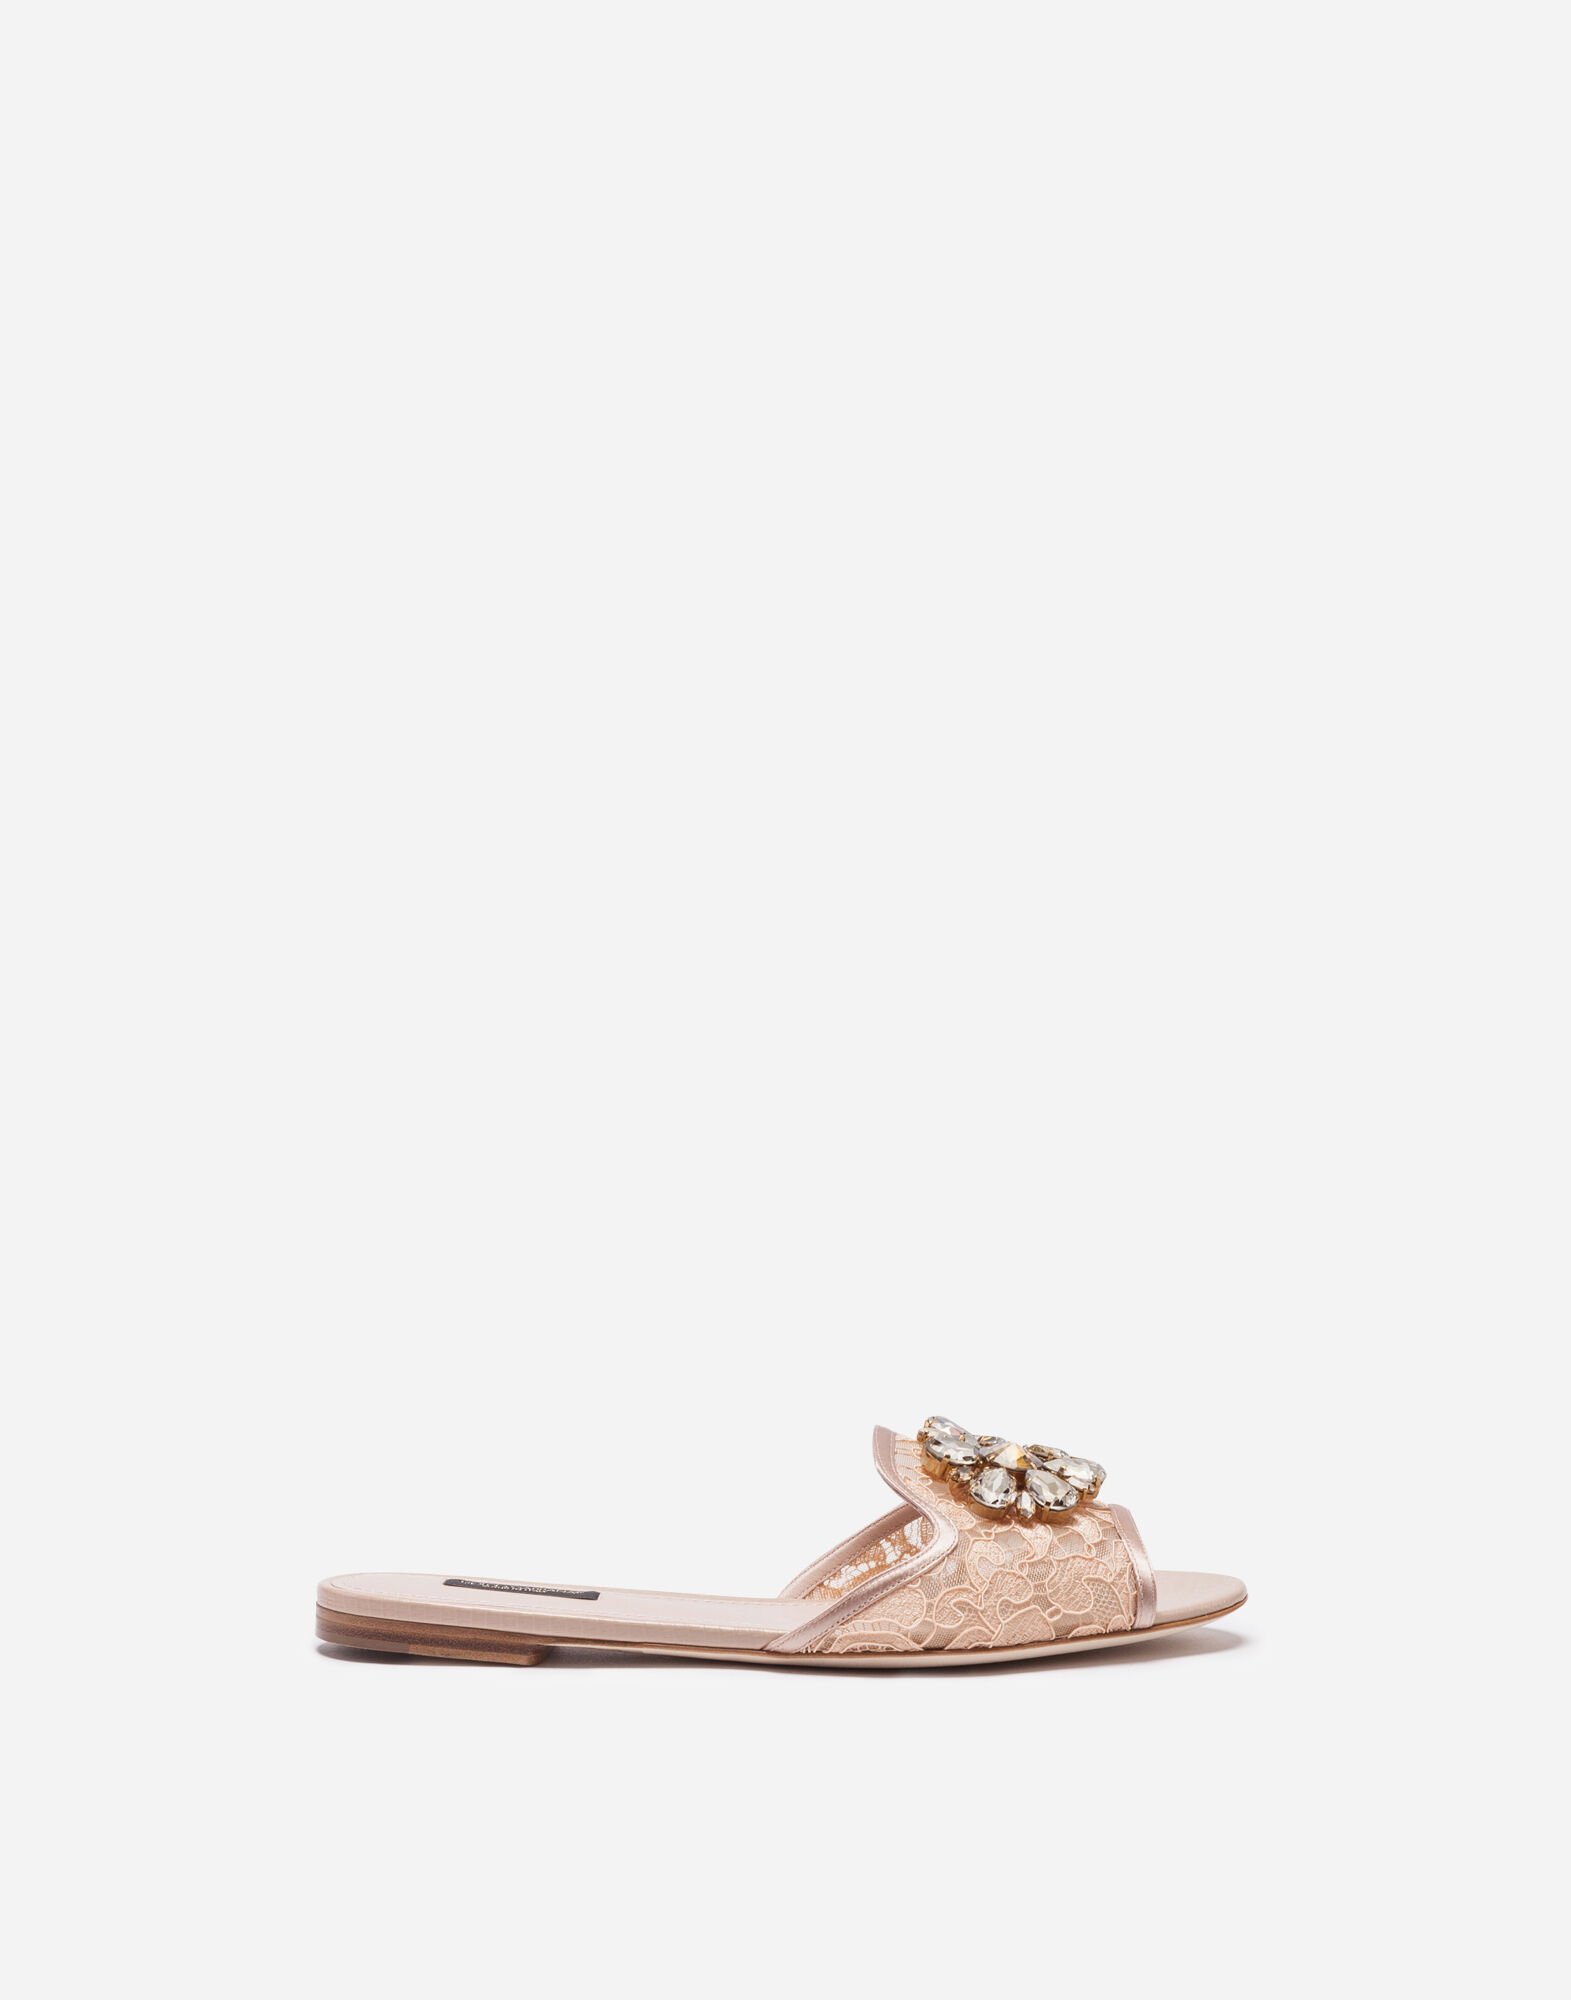 Dolce & Gabbana Lace rainbow slides with brooch detailing White/Pink CK1791AX589